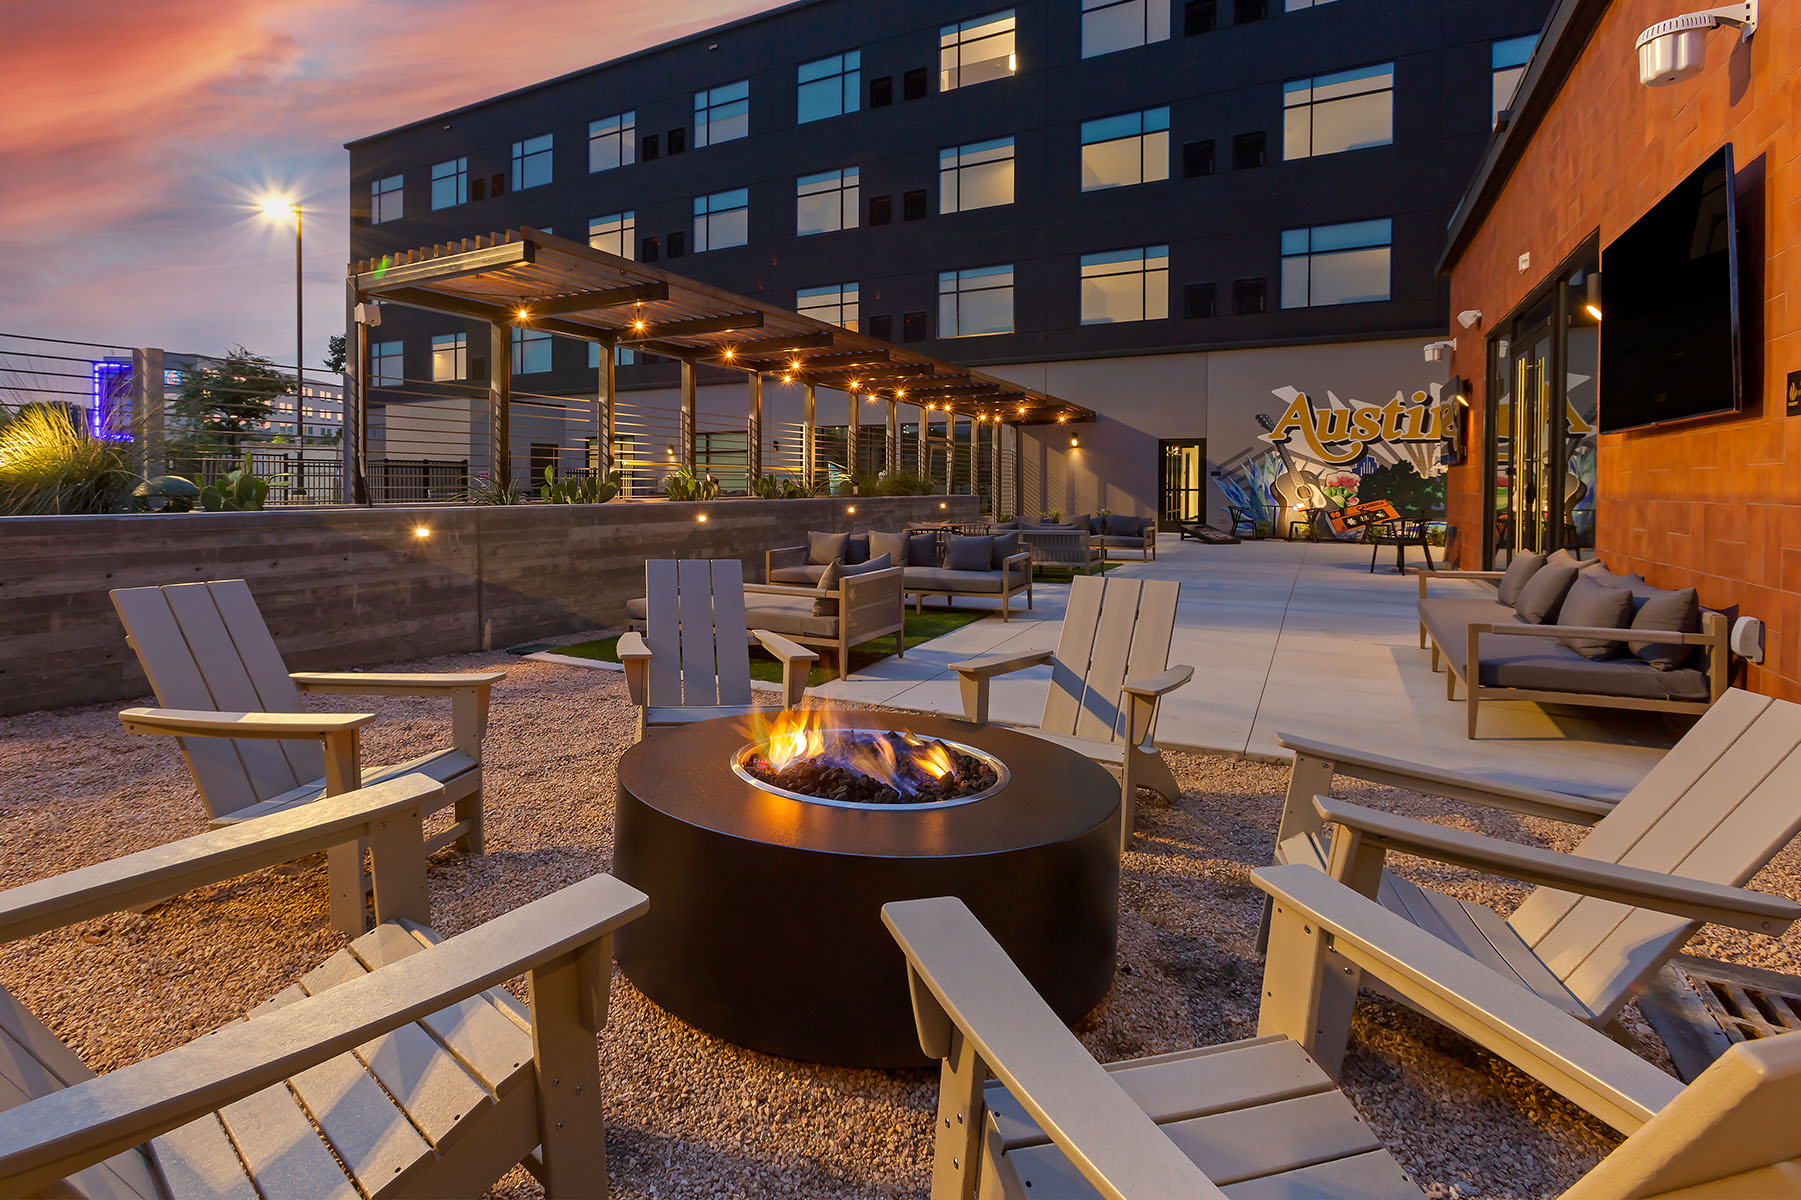 The Cambria hotel in Austin, Texas fire pit.